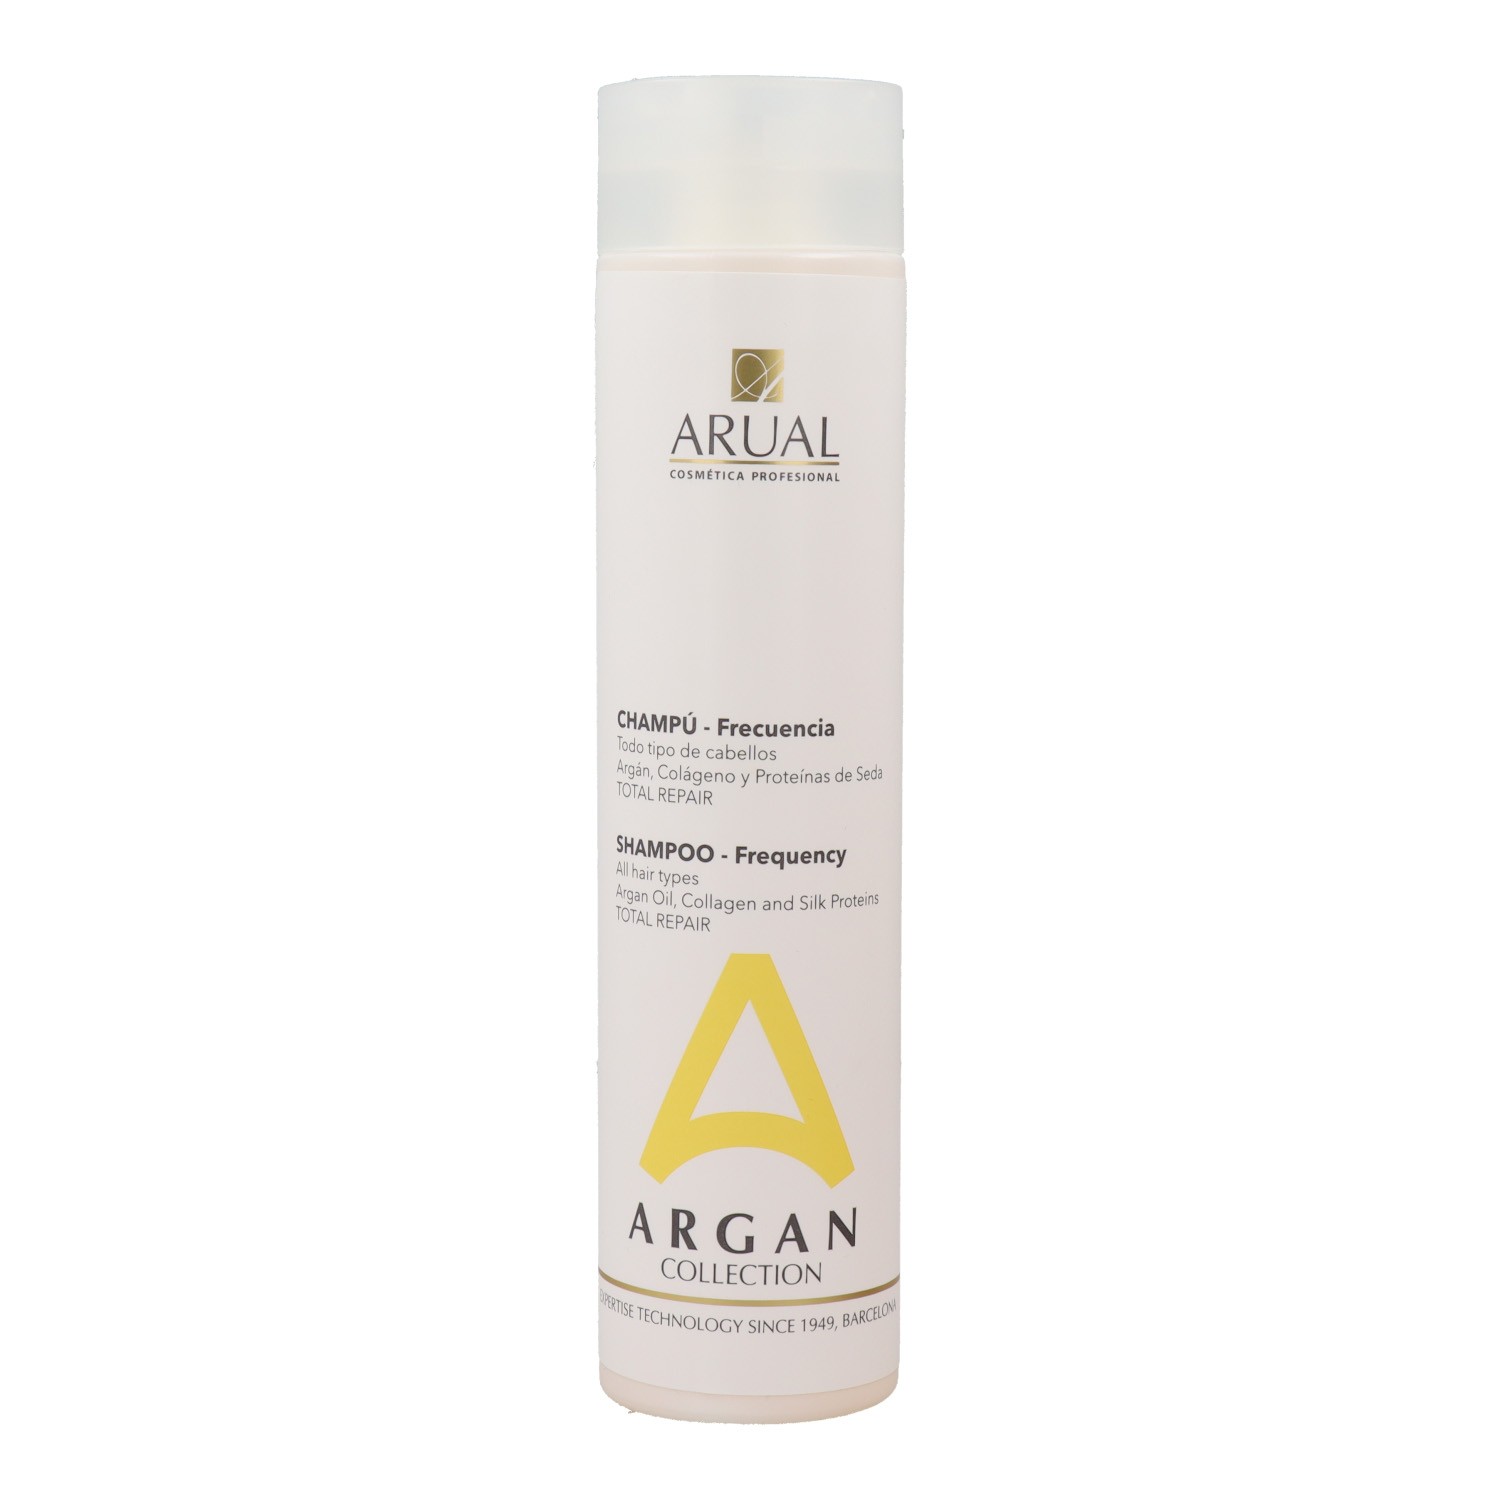 Arual Argan Collection Shampooing Fréquence 250 ml